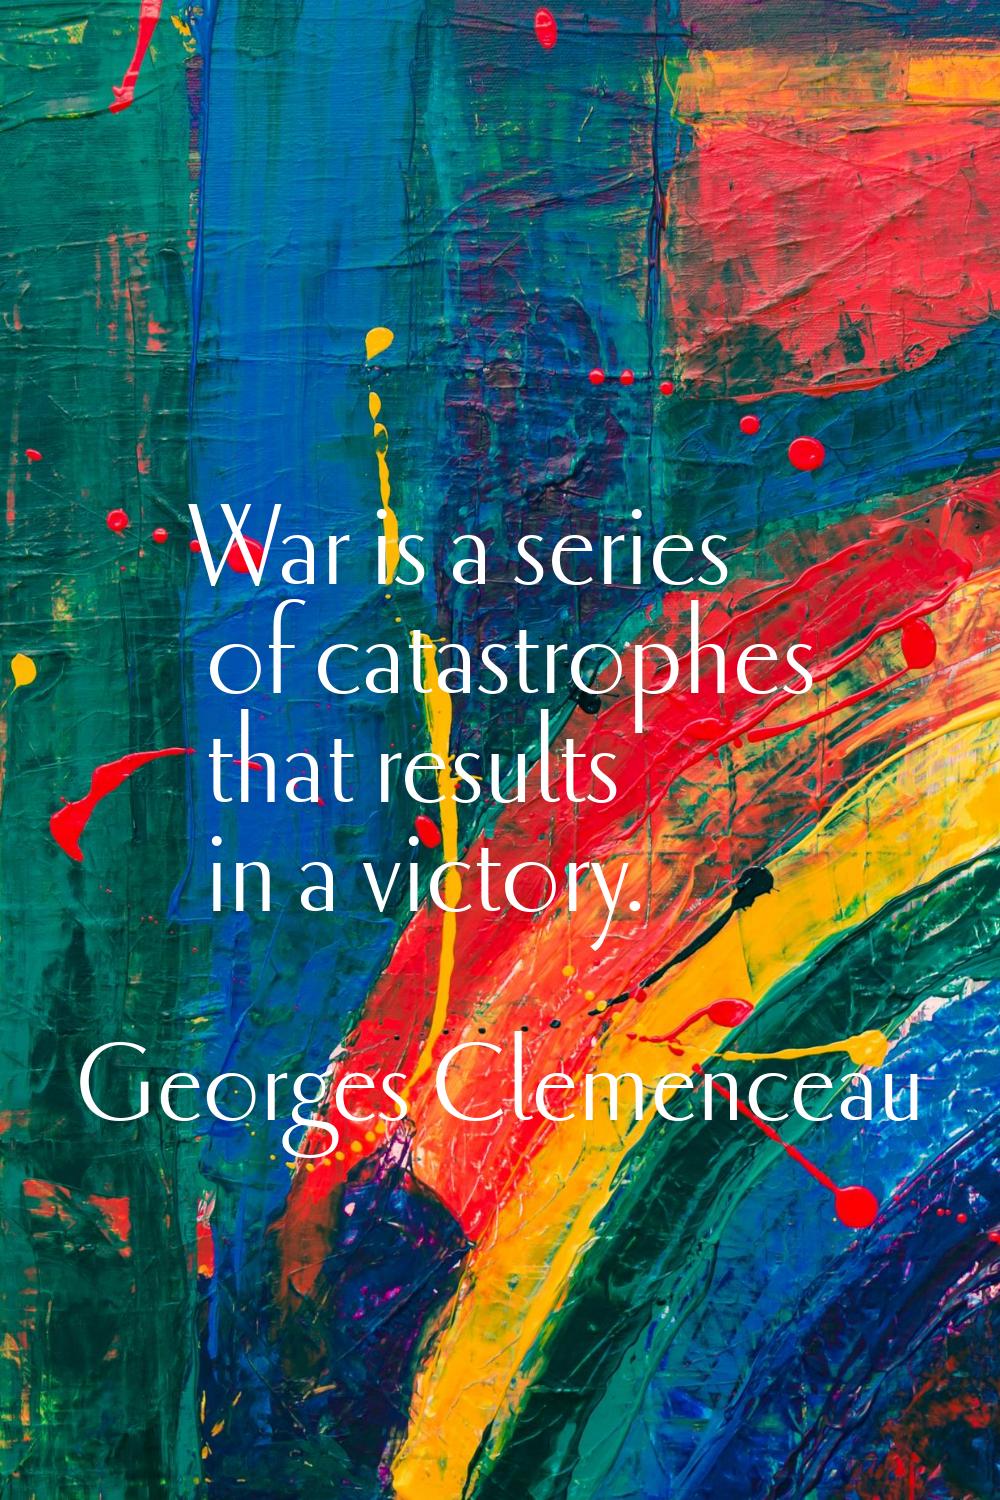 War is a series of catastrophes that results in a victory.